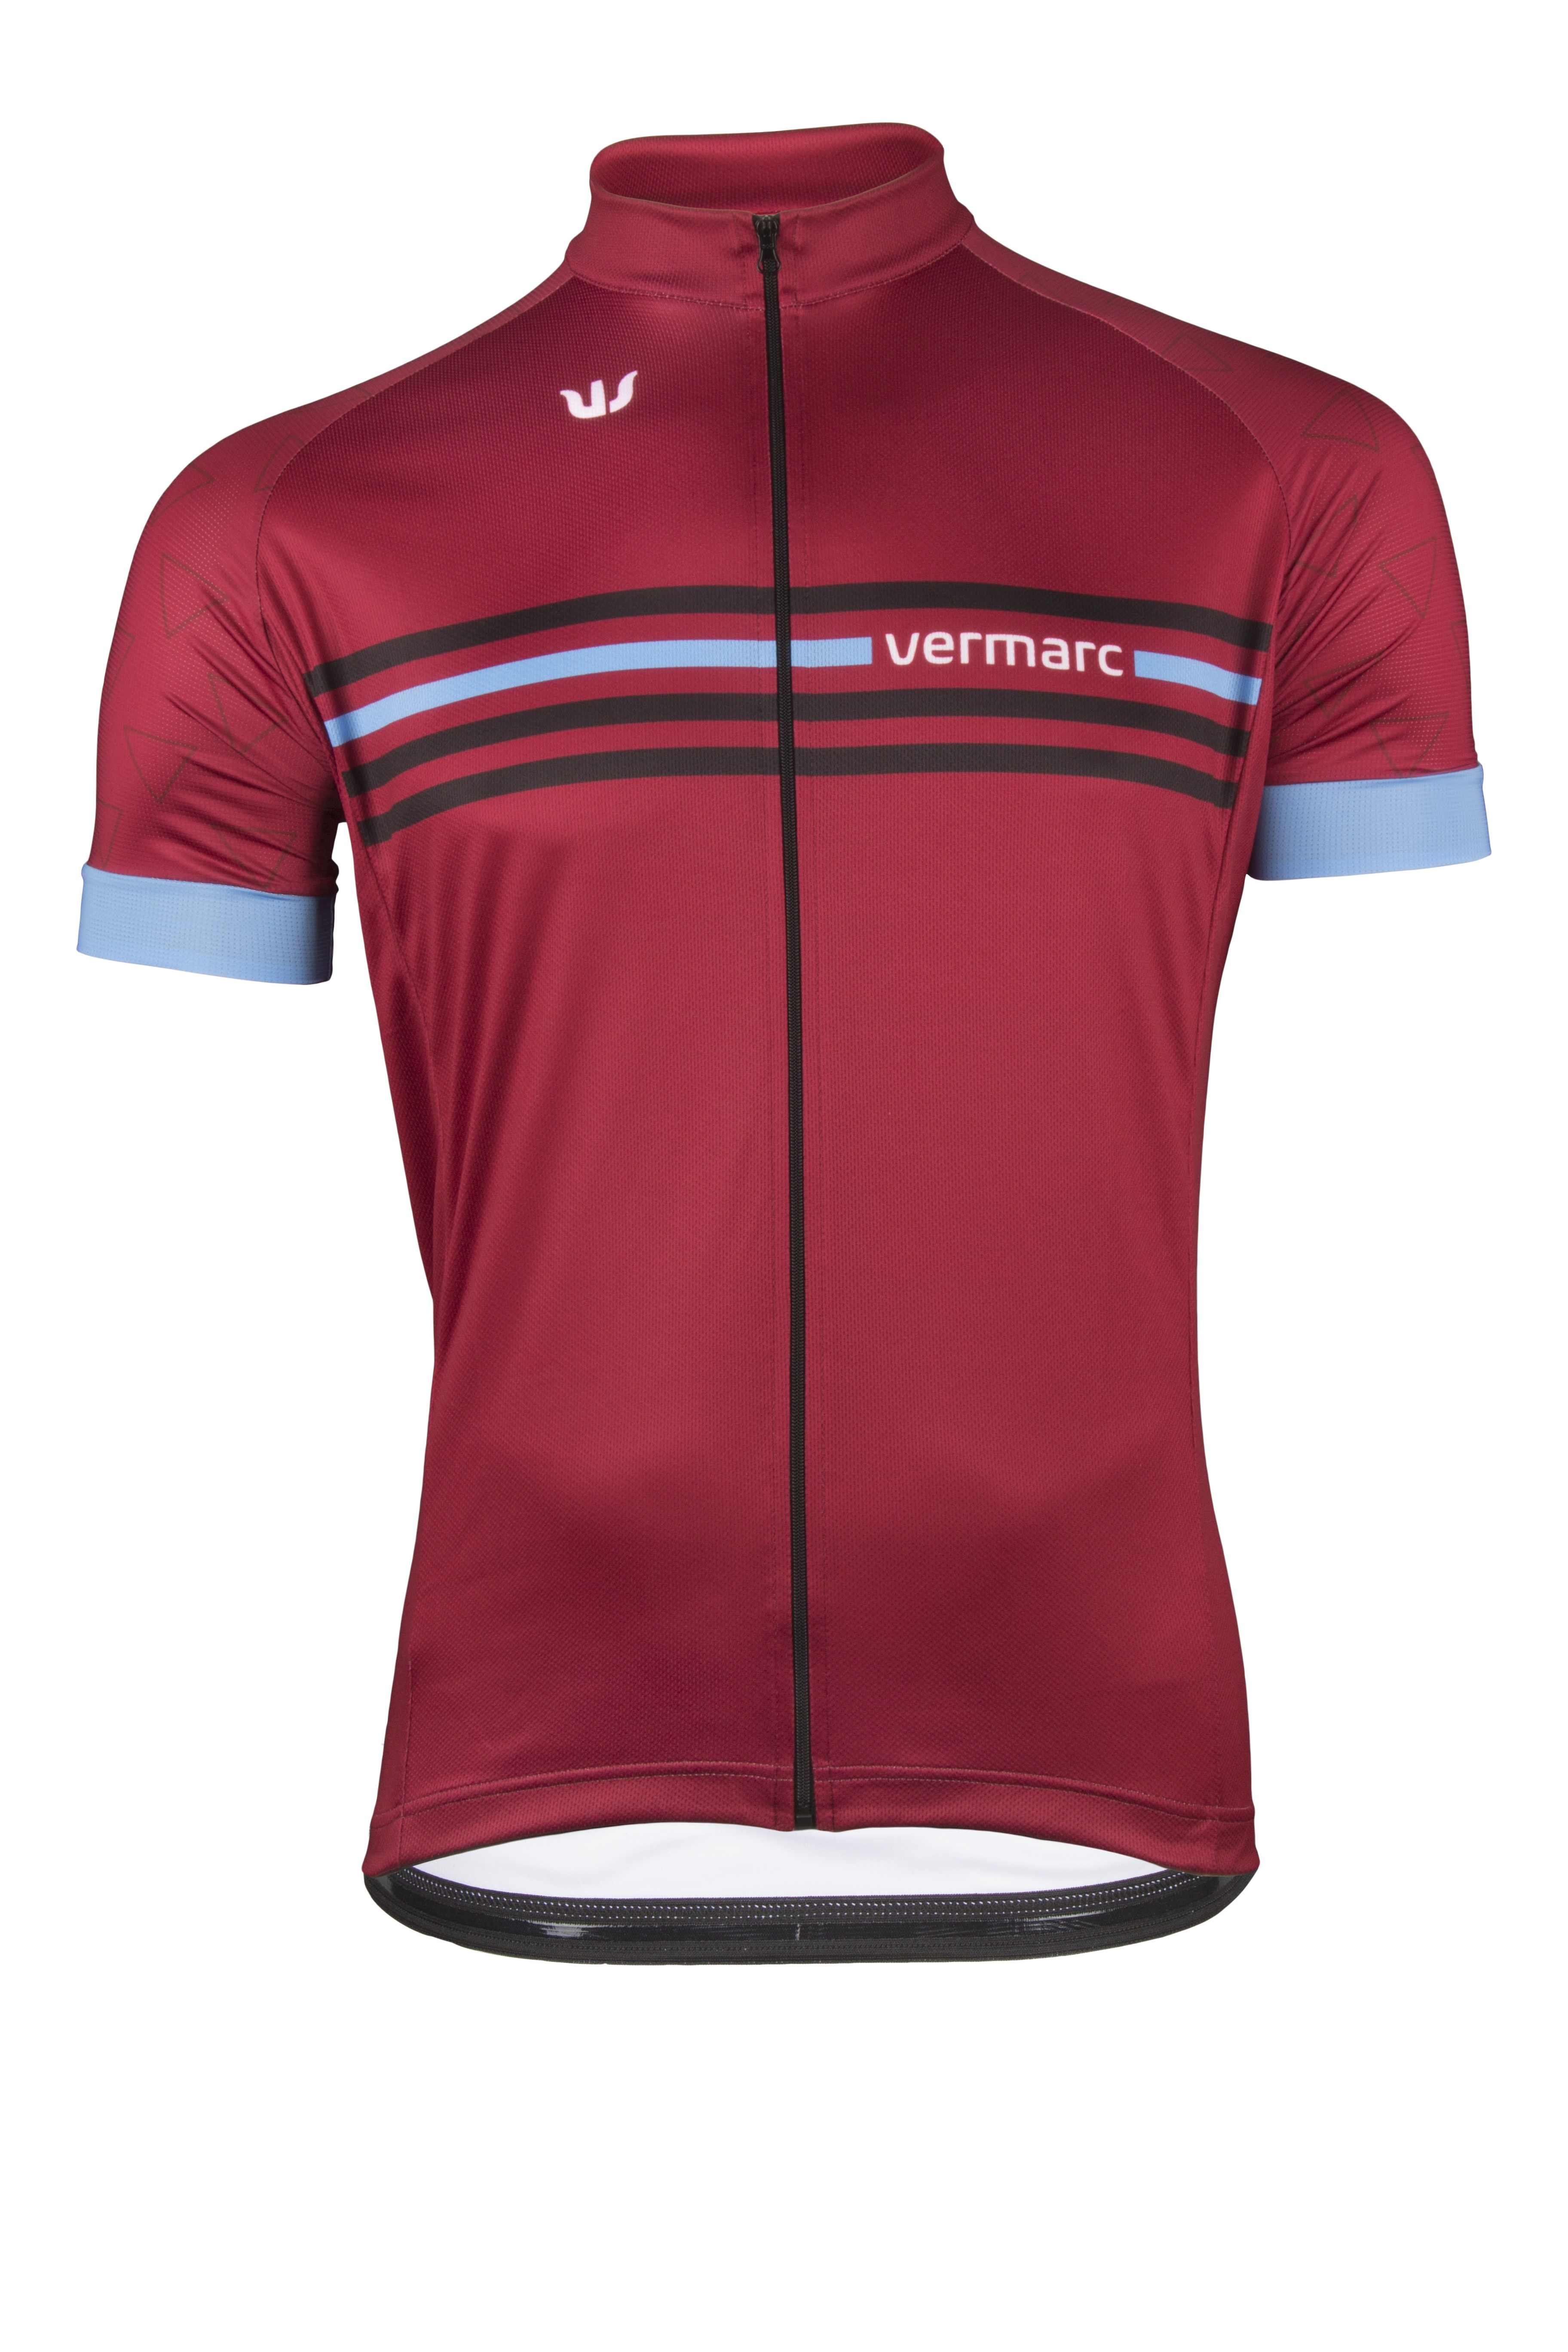 VERMARC Attaco Jersey SS Red Blue